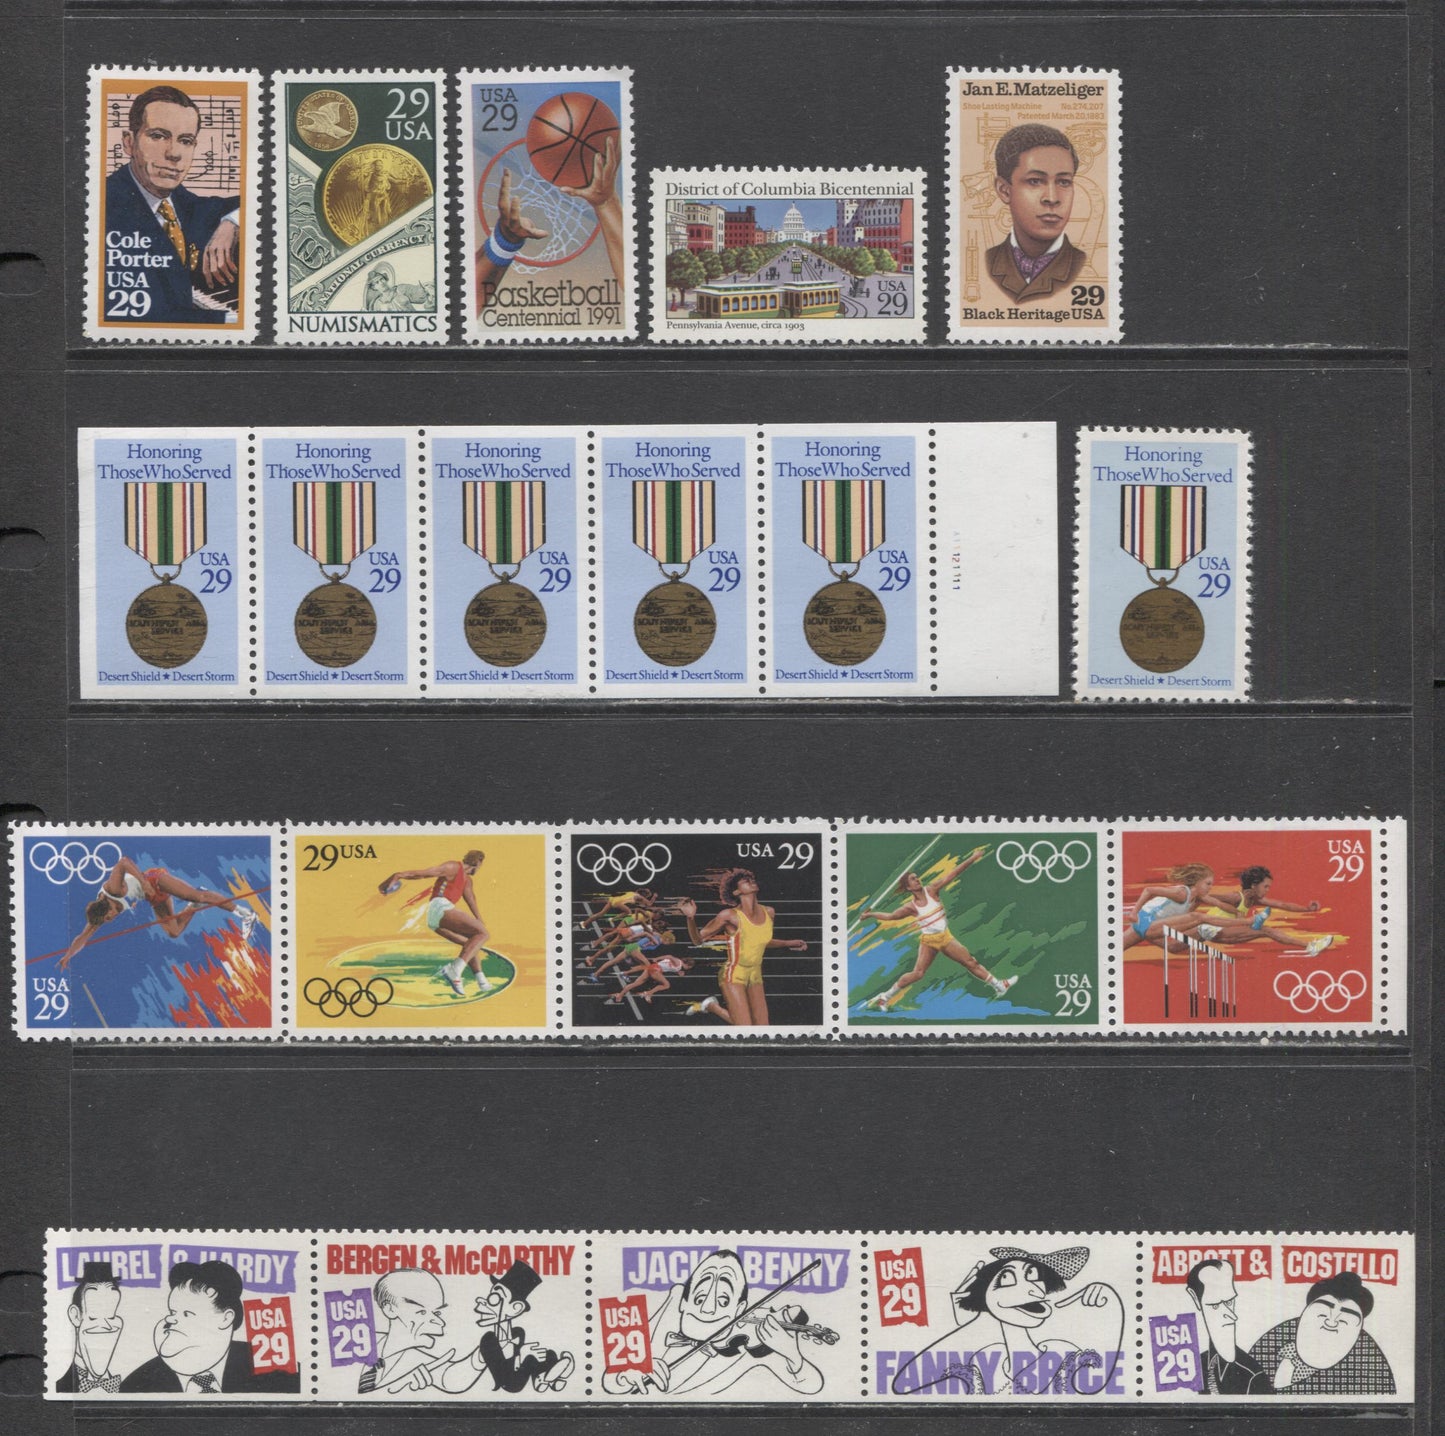 Lot 41 United States SC#2550/2566a 1991 Desert Shield/Storm, Cole Porter, Olympics, Basketball, District Of Columbia Bicentenary, Black Heritage & Comedians Issues, 9 VFNH Singles & Strips Of 5, 2017 Scott Cat. $14.6